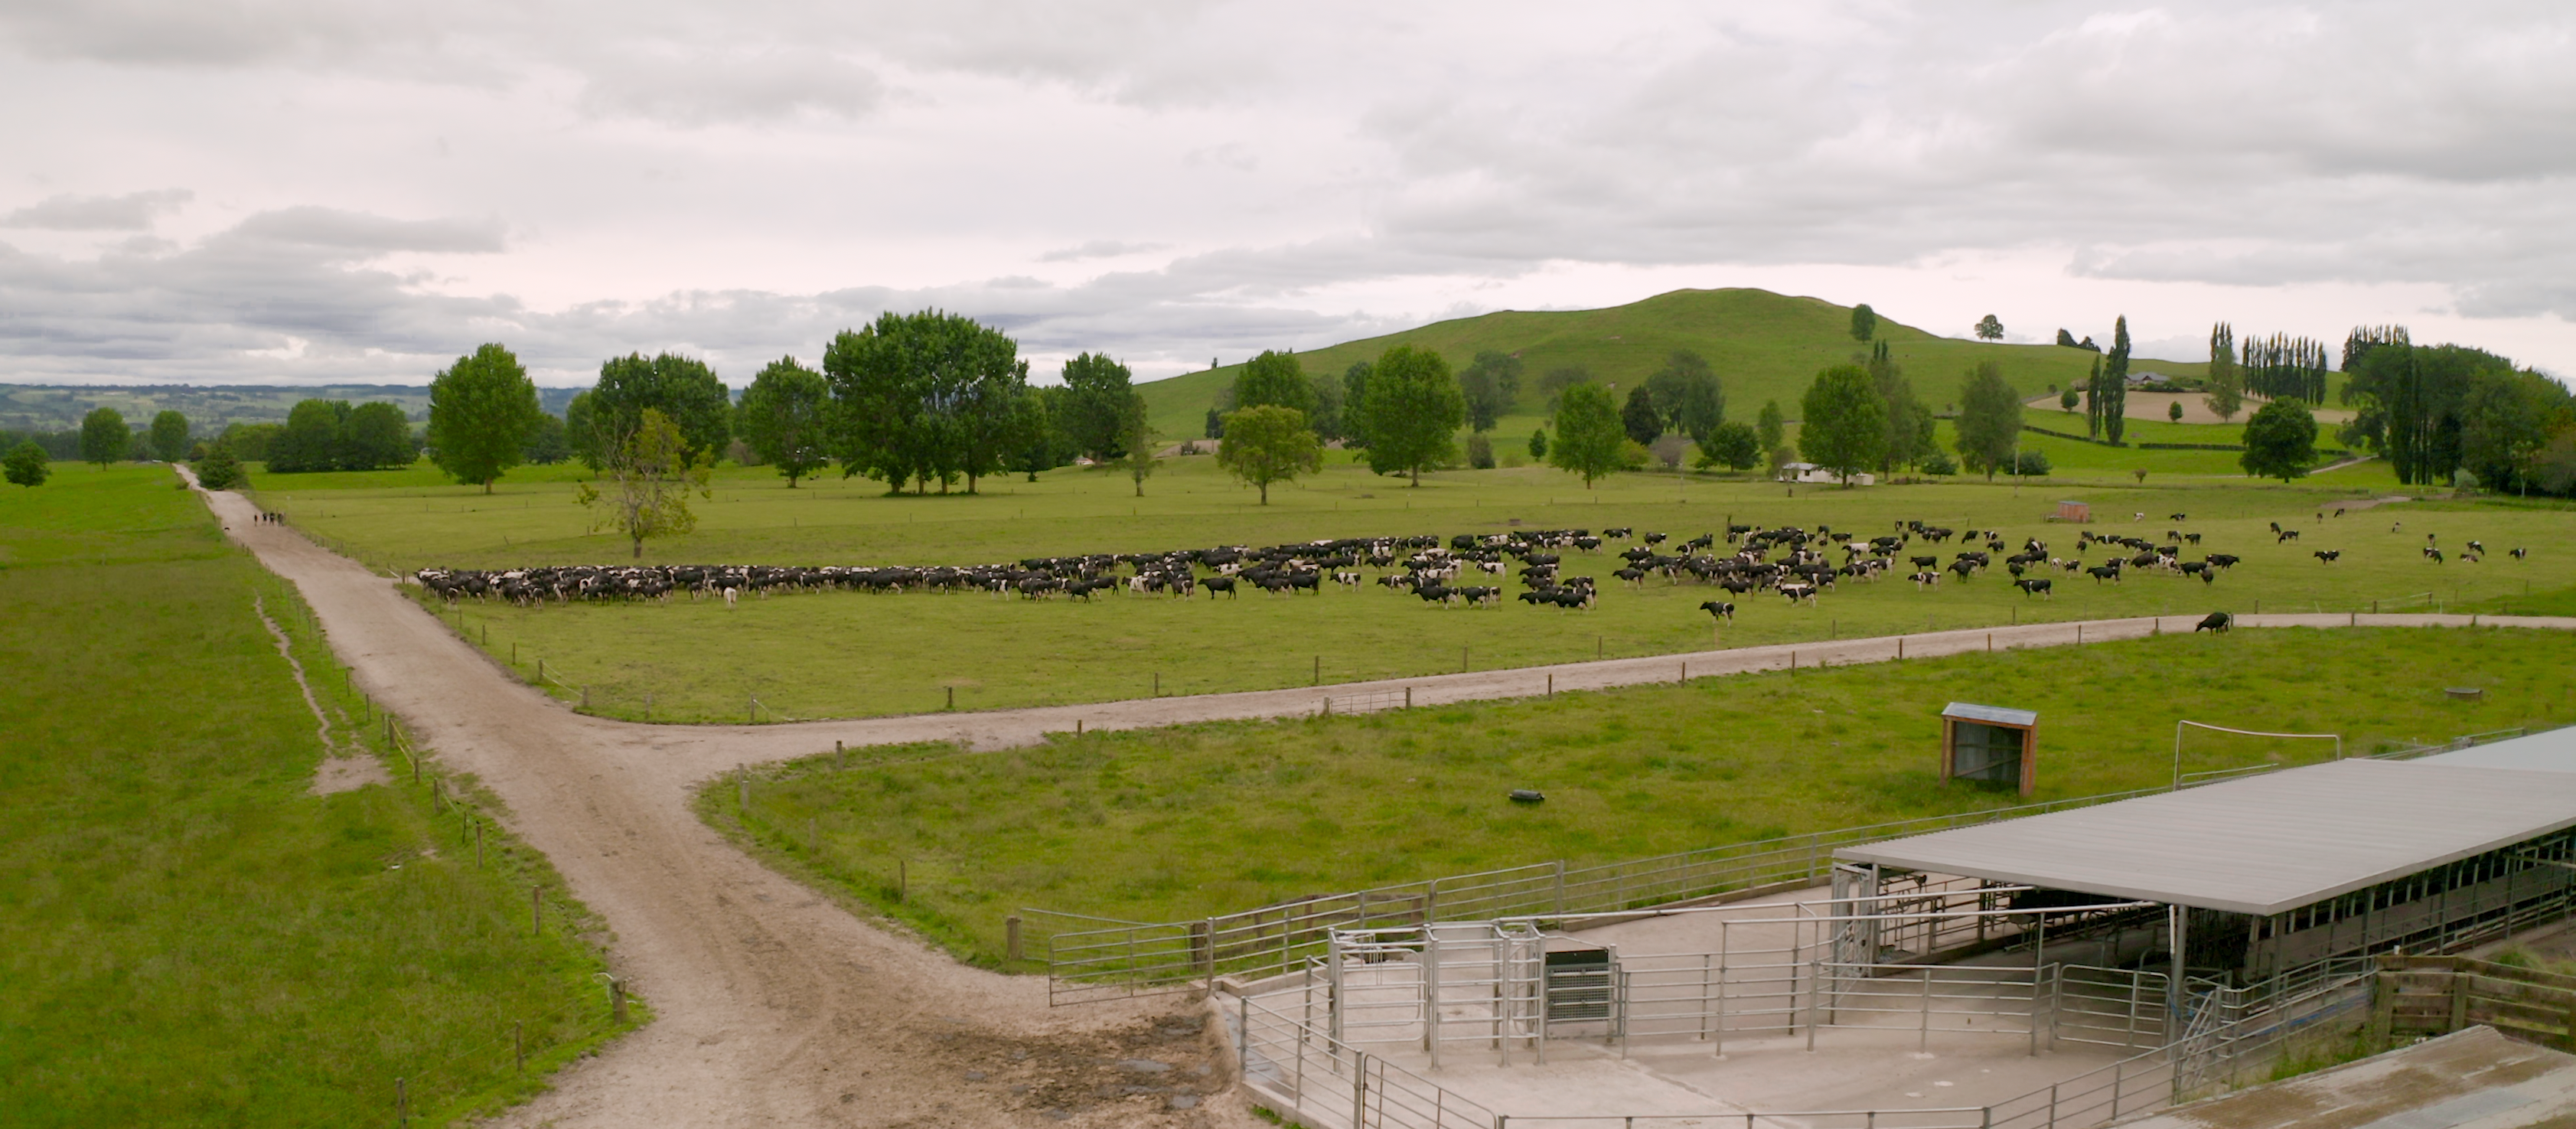 An overhead shot of the Leslie farm and herd with CowManager